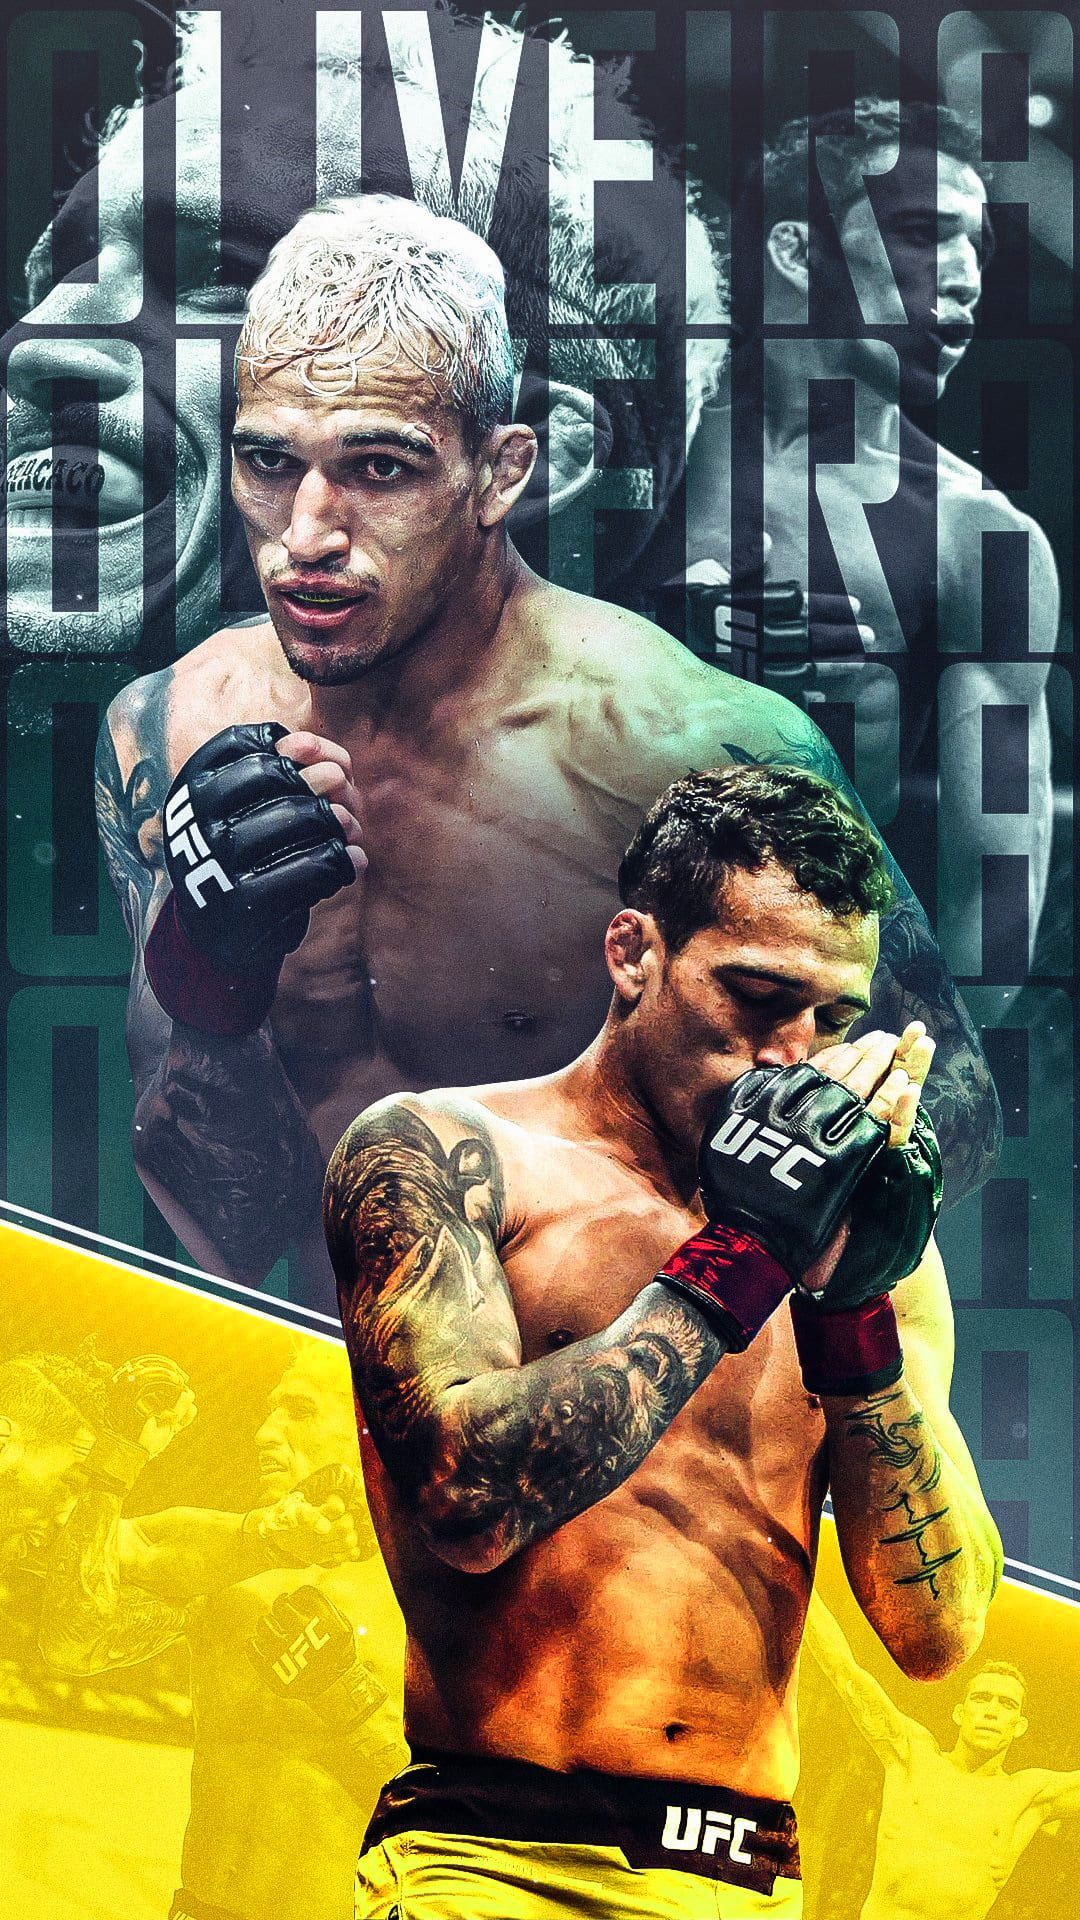 Charles Oliveira Wallpaper Discover More Charles Oliveira, Fight, Martial Arts, MMA, UFC Wallpaper. /charles O. Ufc, Ufc Poster, Ufc Fighters